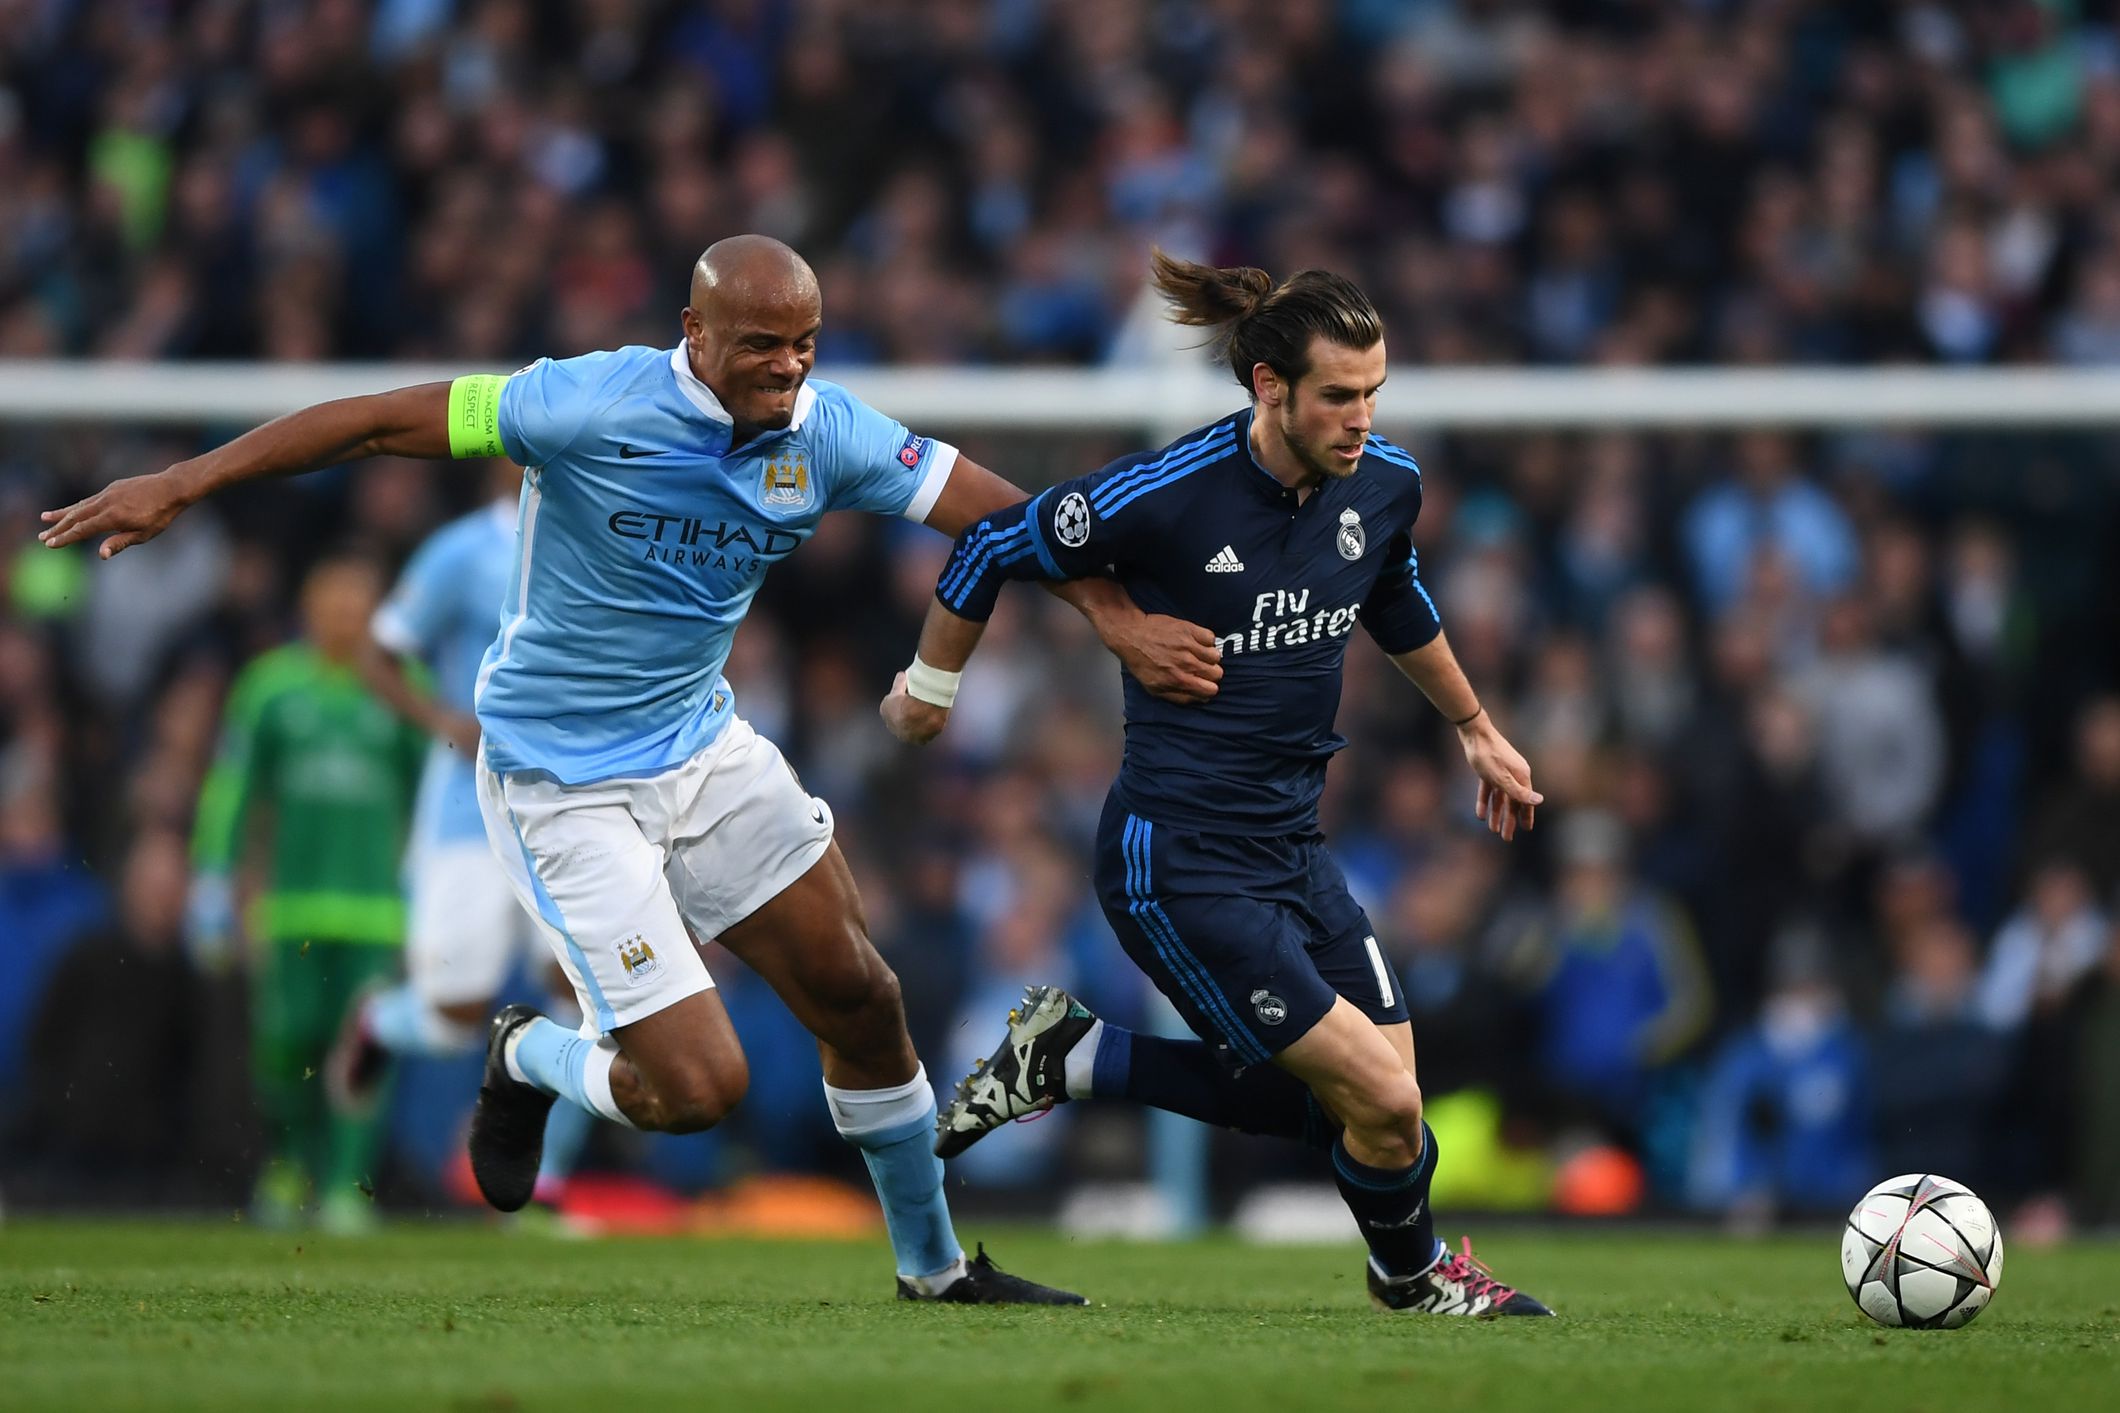 Manchester City vs Real Madrid, 2016 Champions League: Final Score 0-0